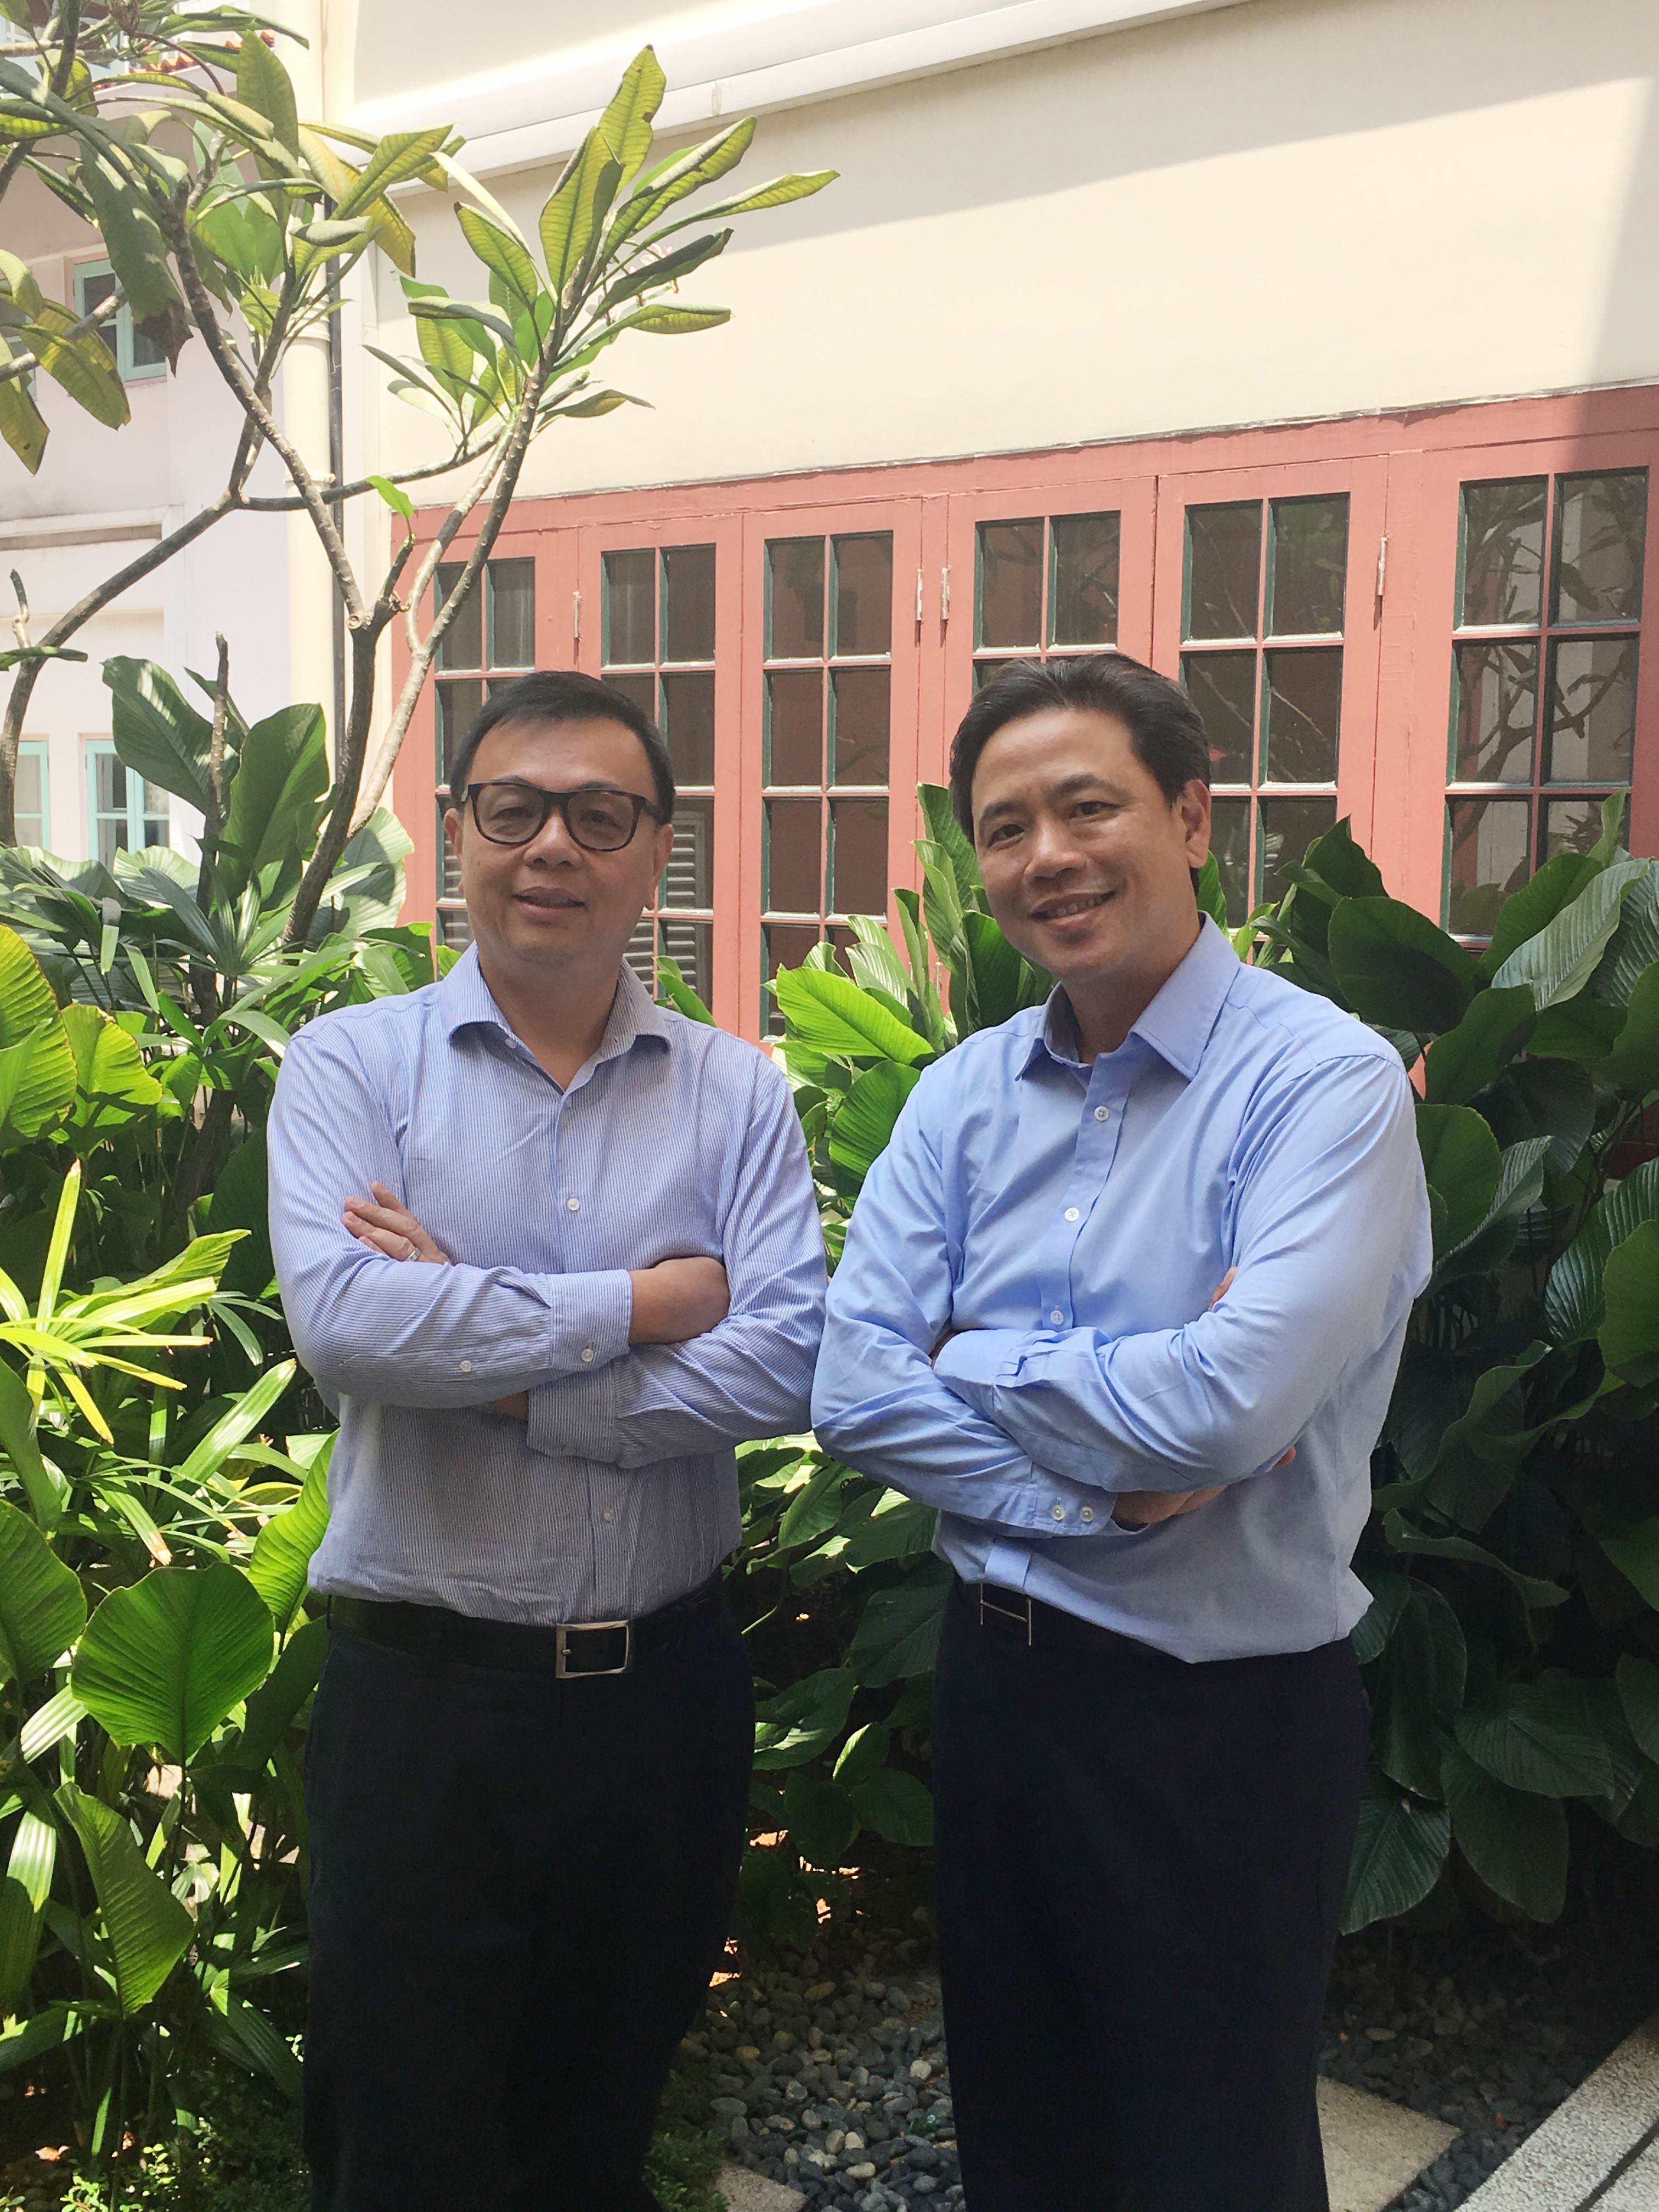 (From left) James Toh, co-founder and director, and Loke Wai San, co-founder and managing director